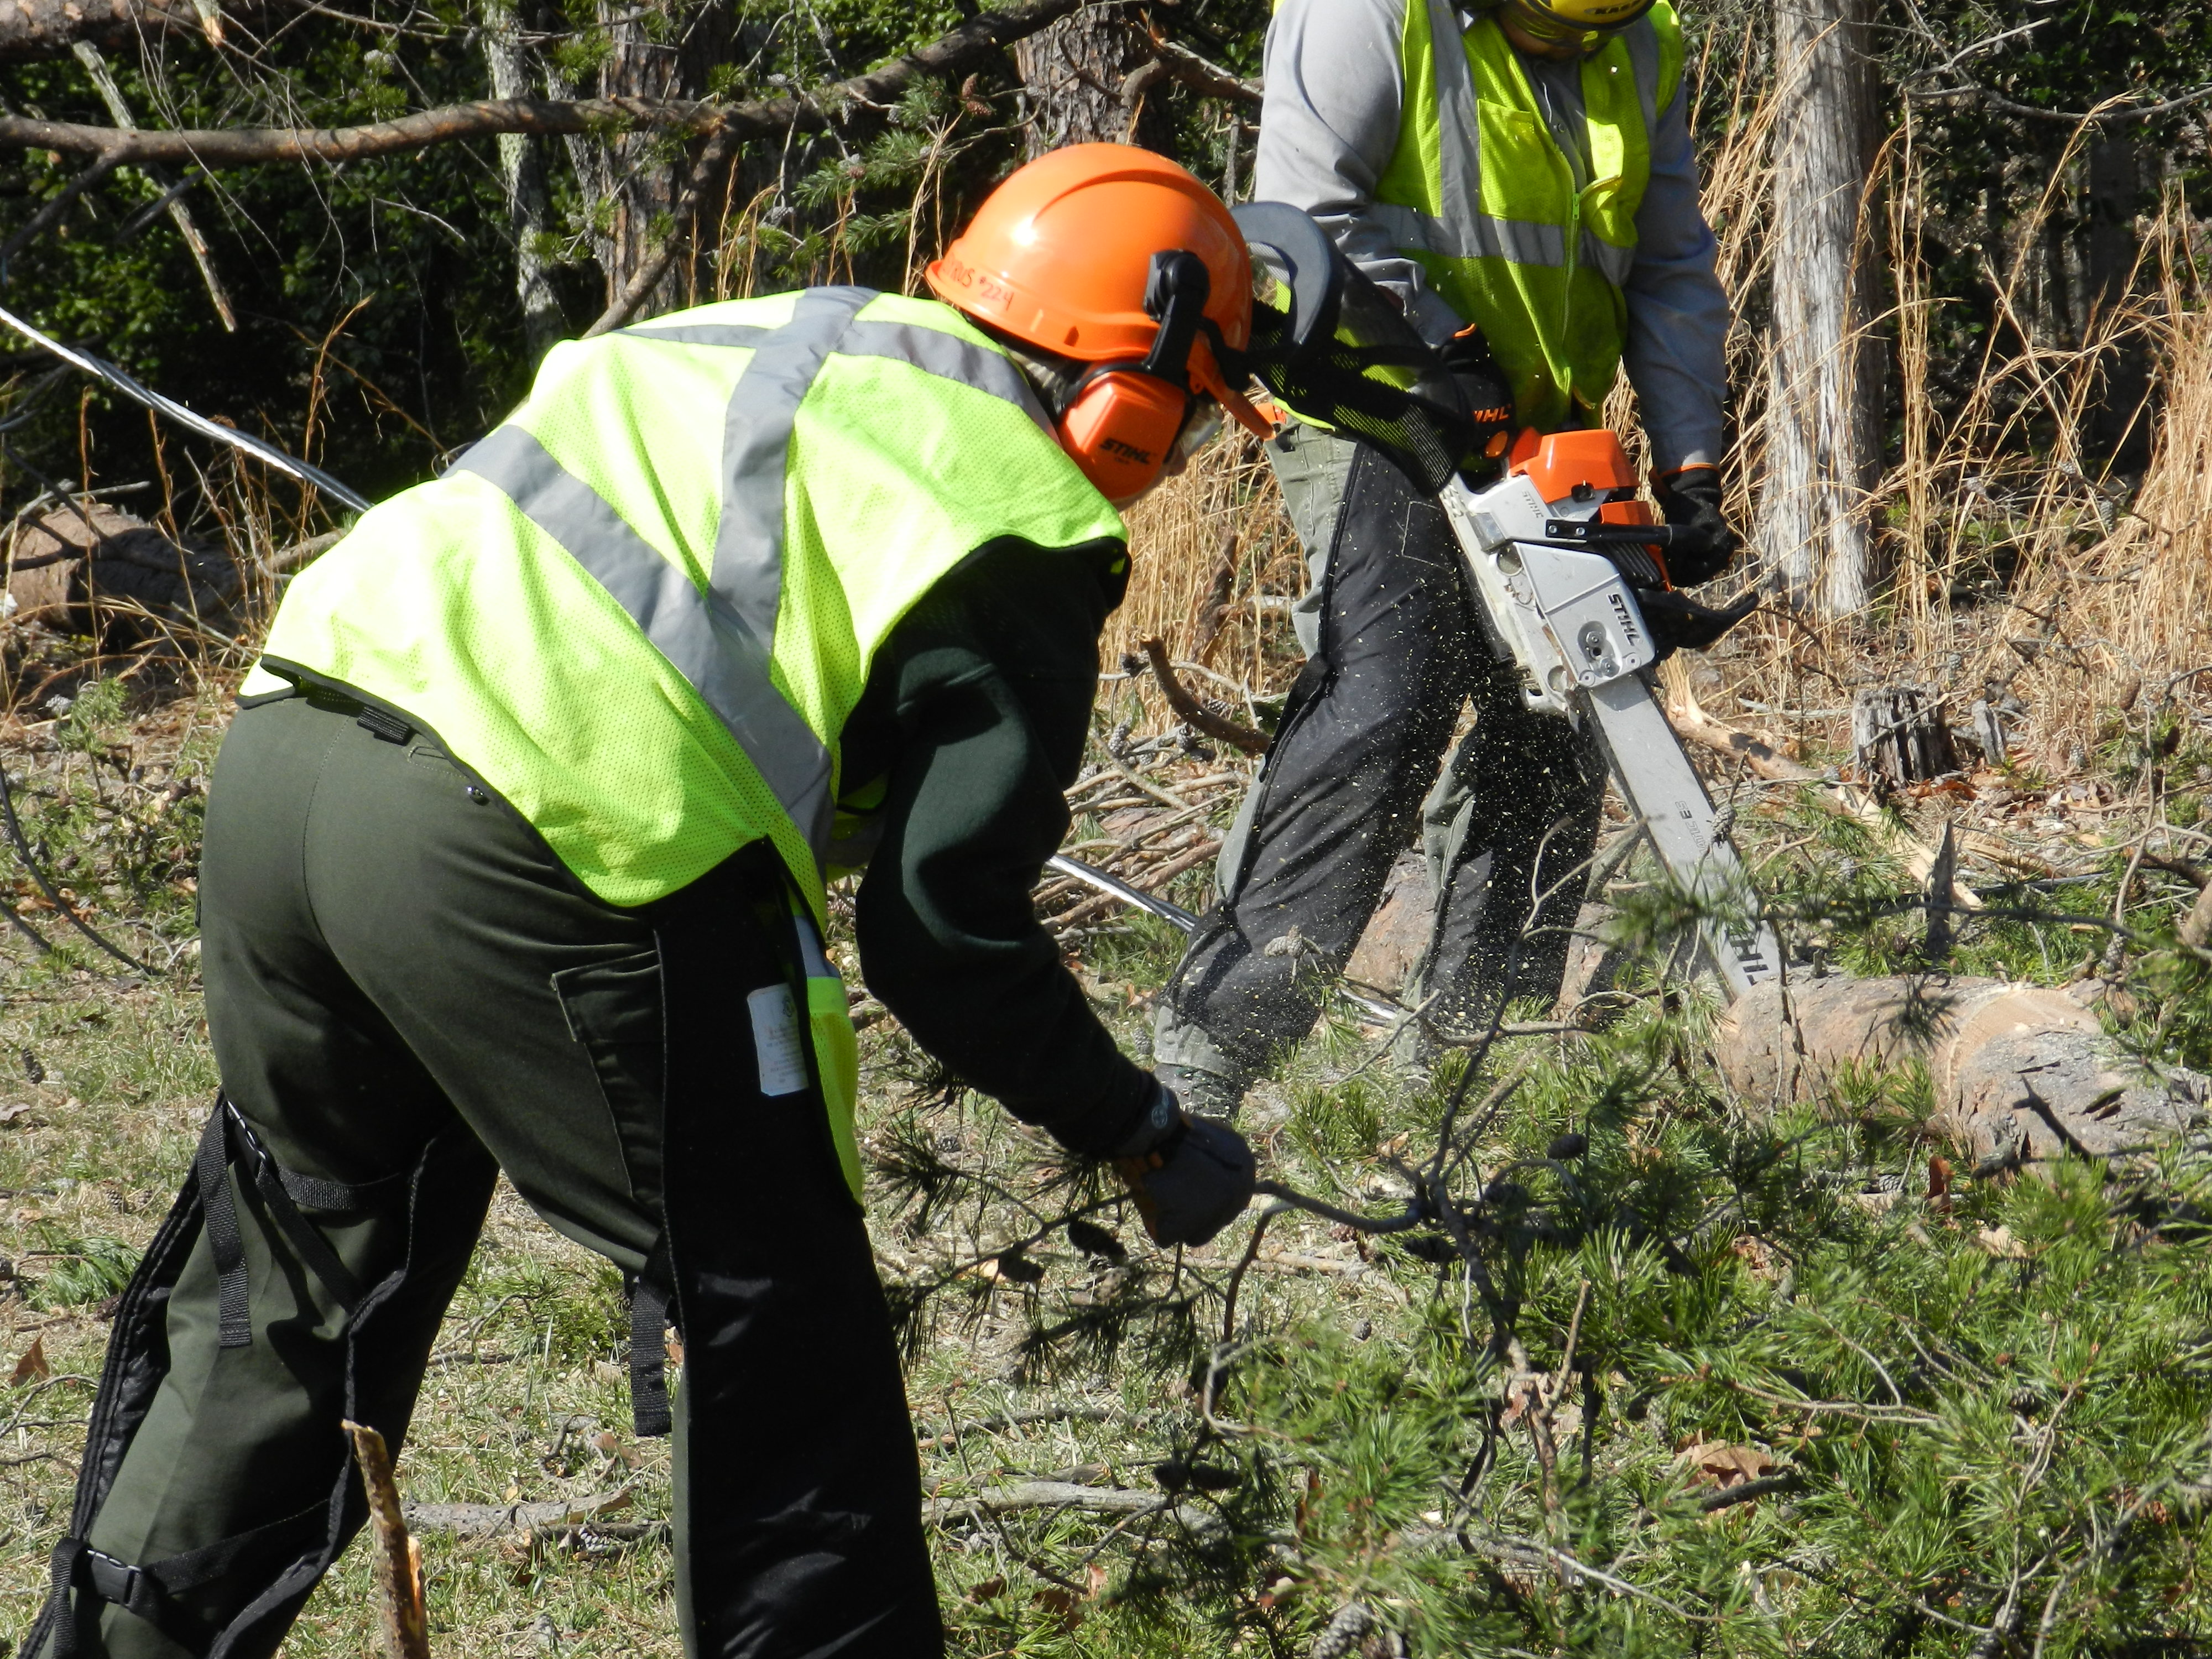 Employees use a chainsaw on a fallen tree.